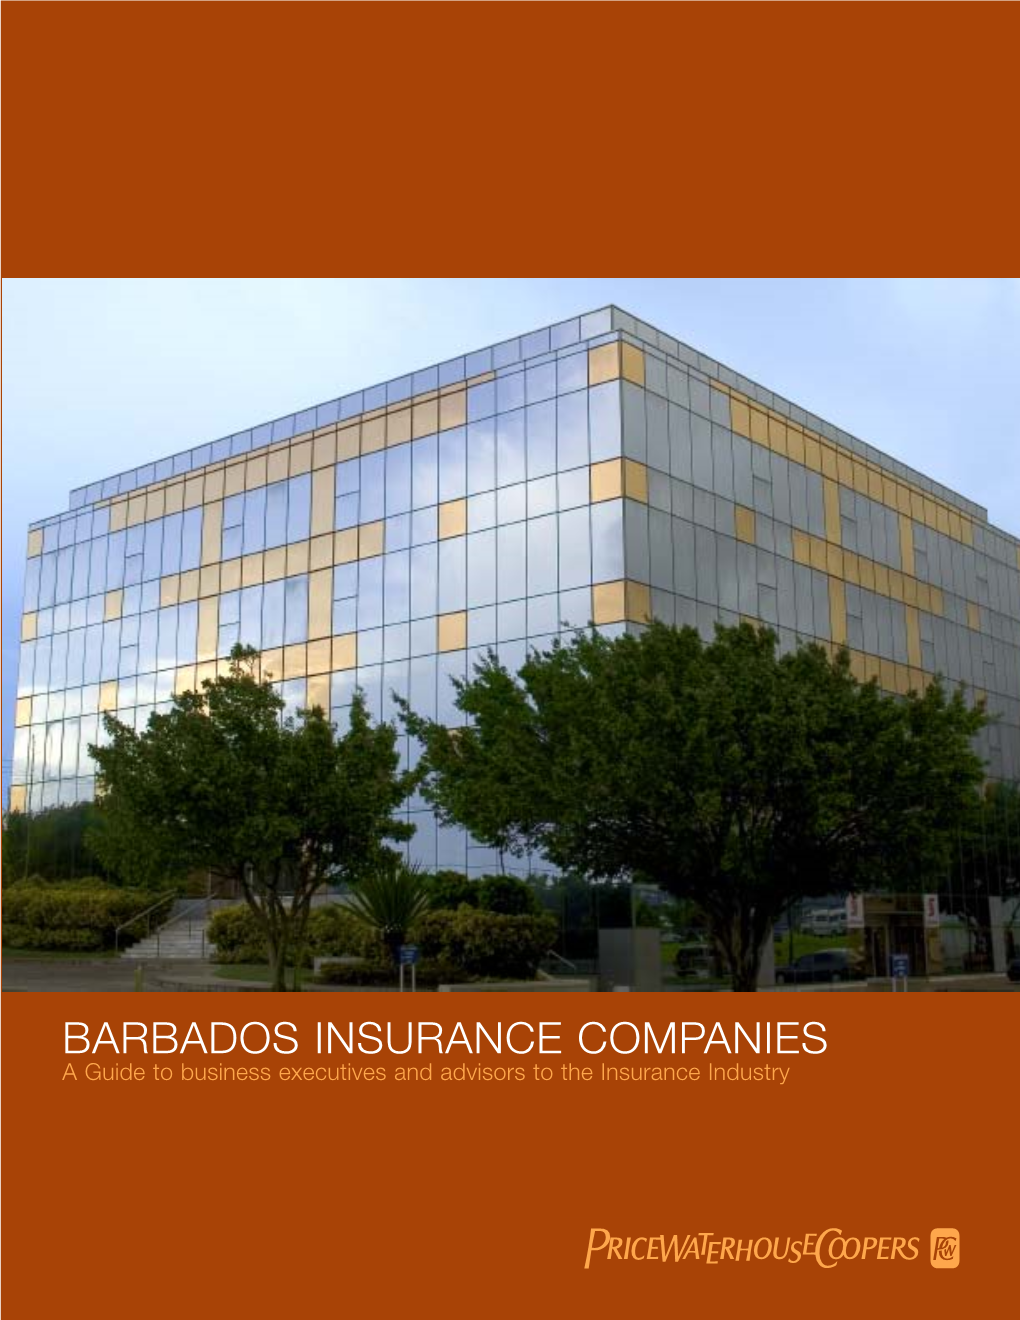 BARBADOS INSURANCE COMPANIES a Guide to Business Executives and Advisors to the Insurance Industry